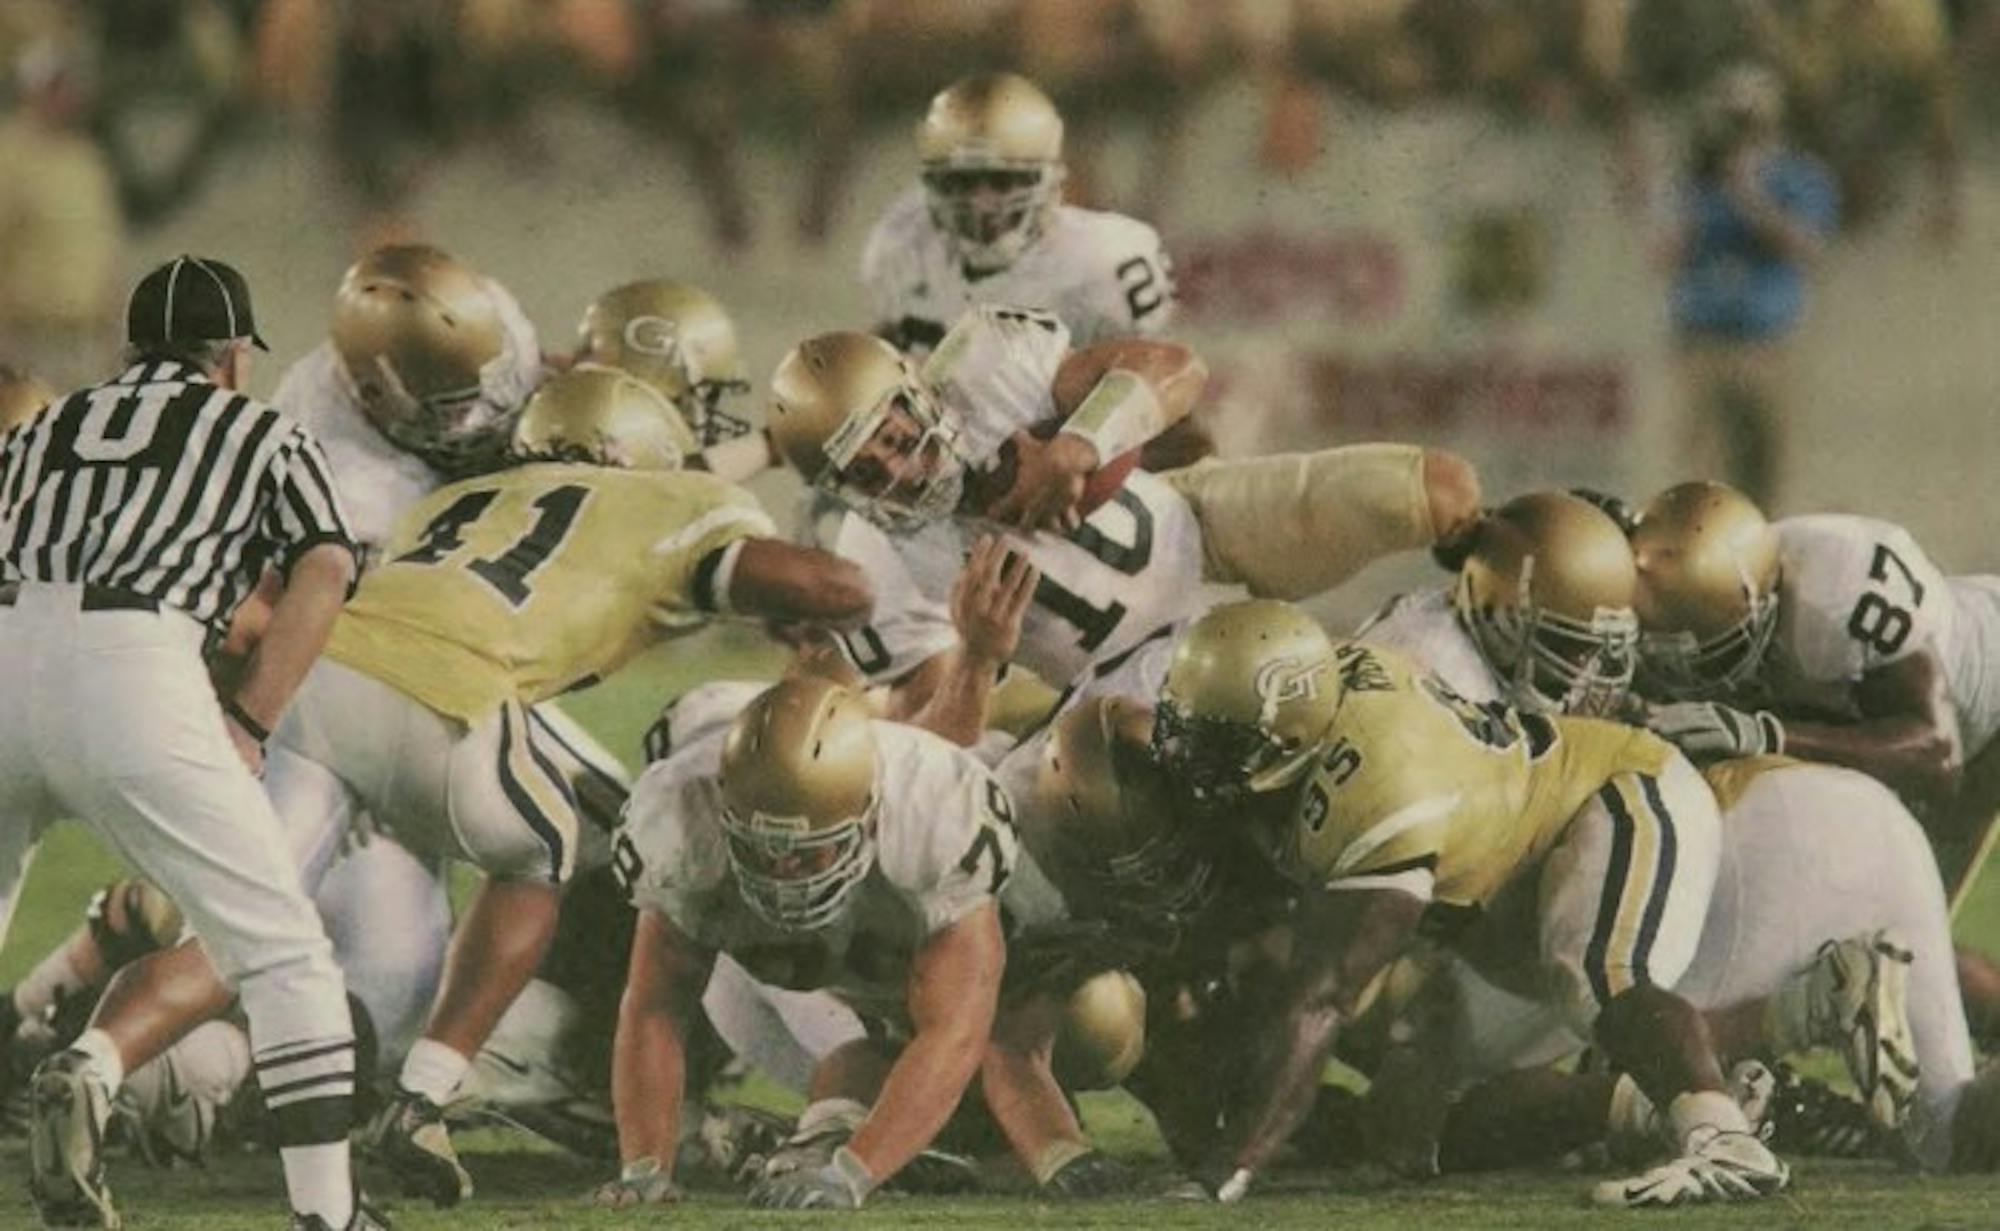 Former Irish quarterback Brady Quinn dives over the line in 14-10 victory over Georgia Tech on Sept. 2, 2006. Now he works to help veterans and their families throughout the country.